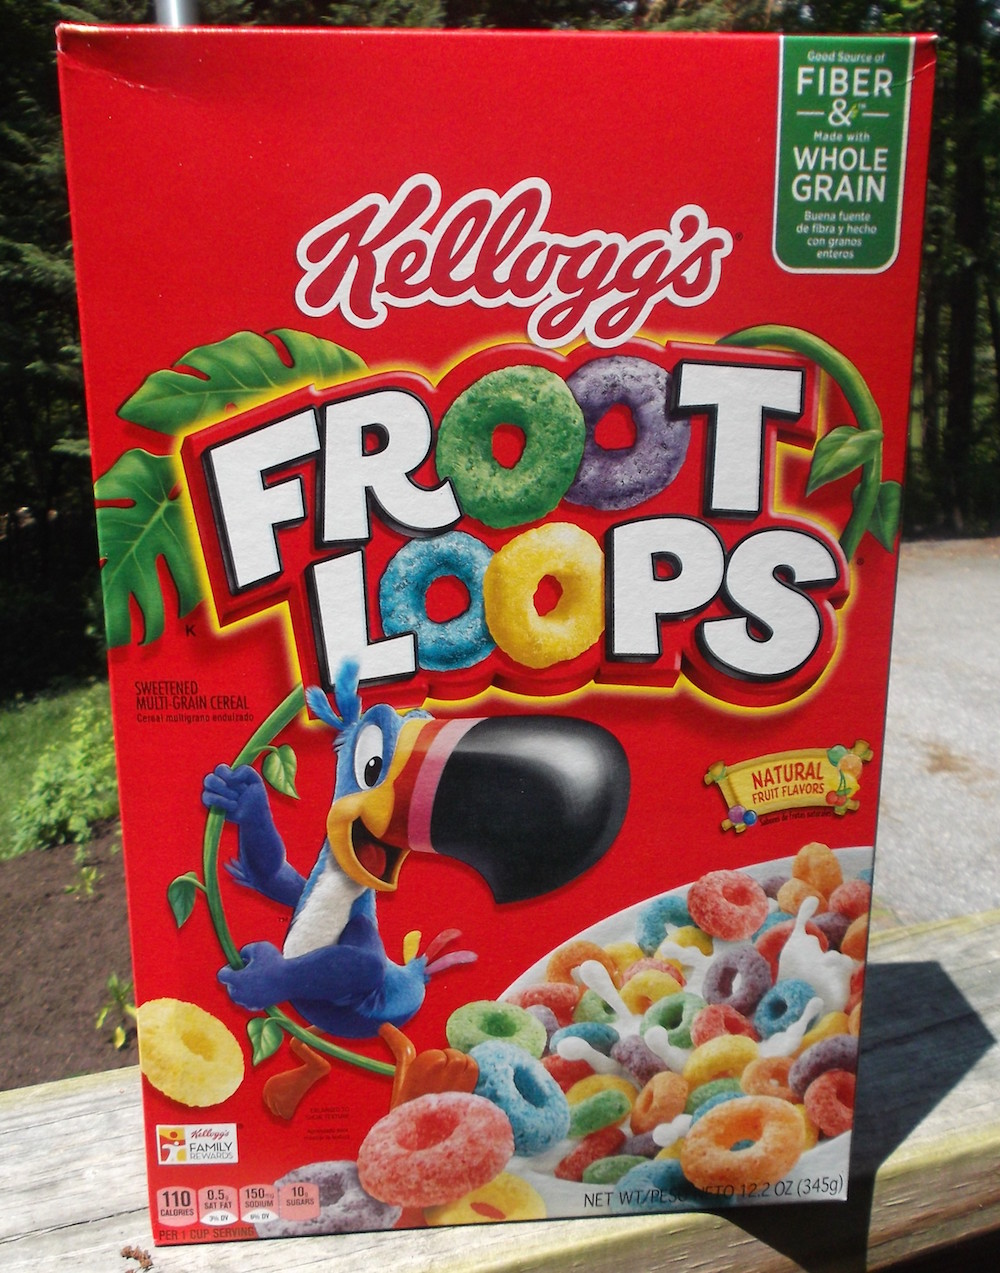 Froot Loops: Fruit-Flavoured Cereal